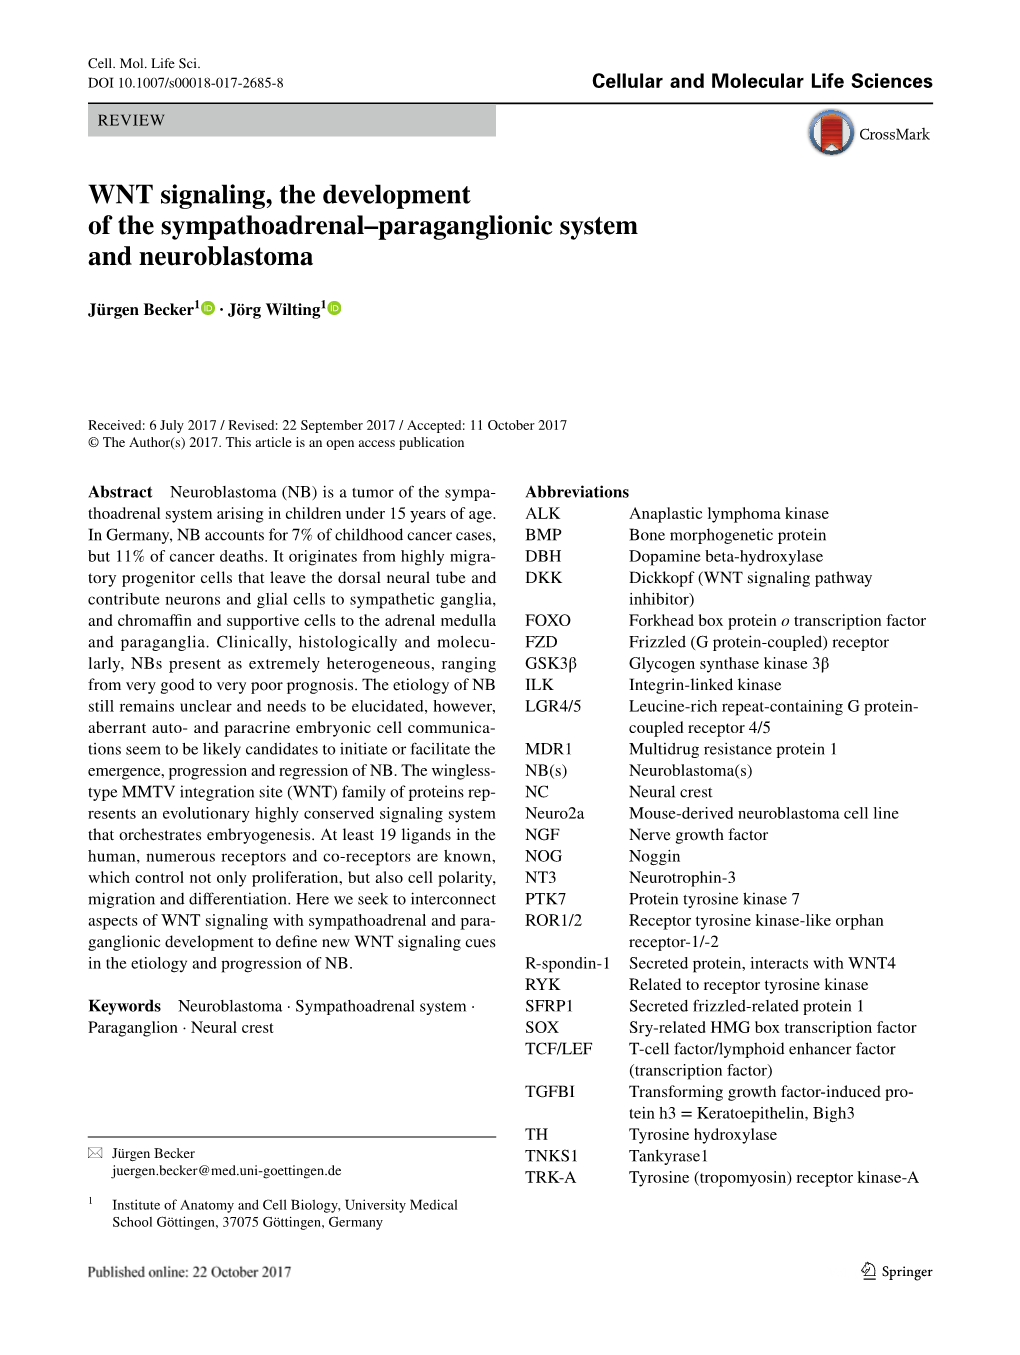 WNT Signaling, the Development of the Sympathoadrenal–Paraganglionic System and Neuroblastoma